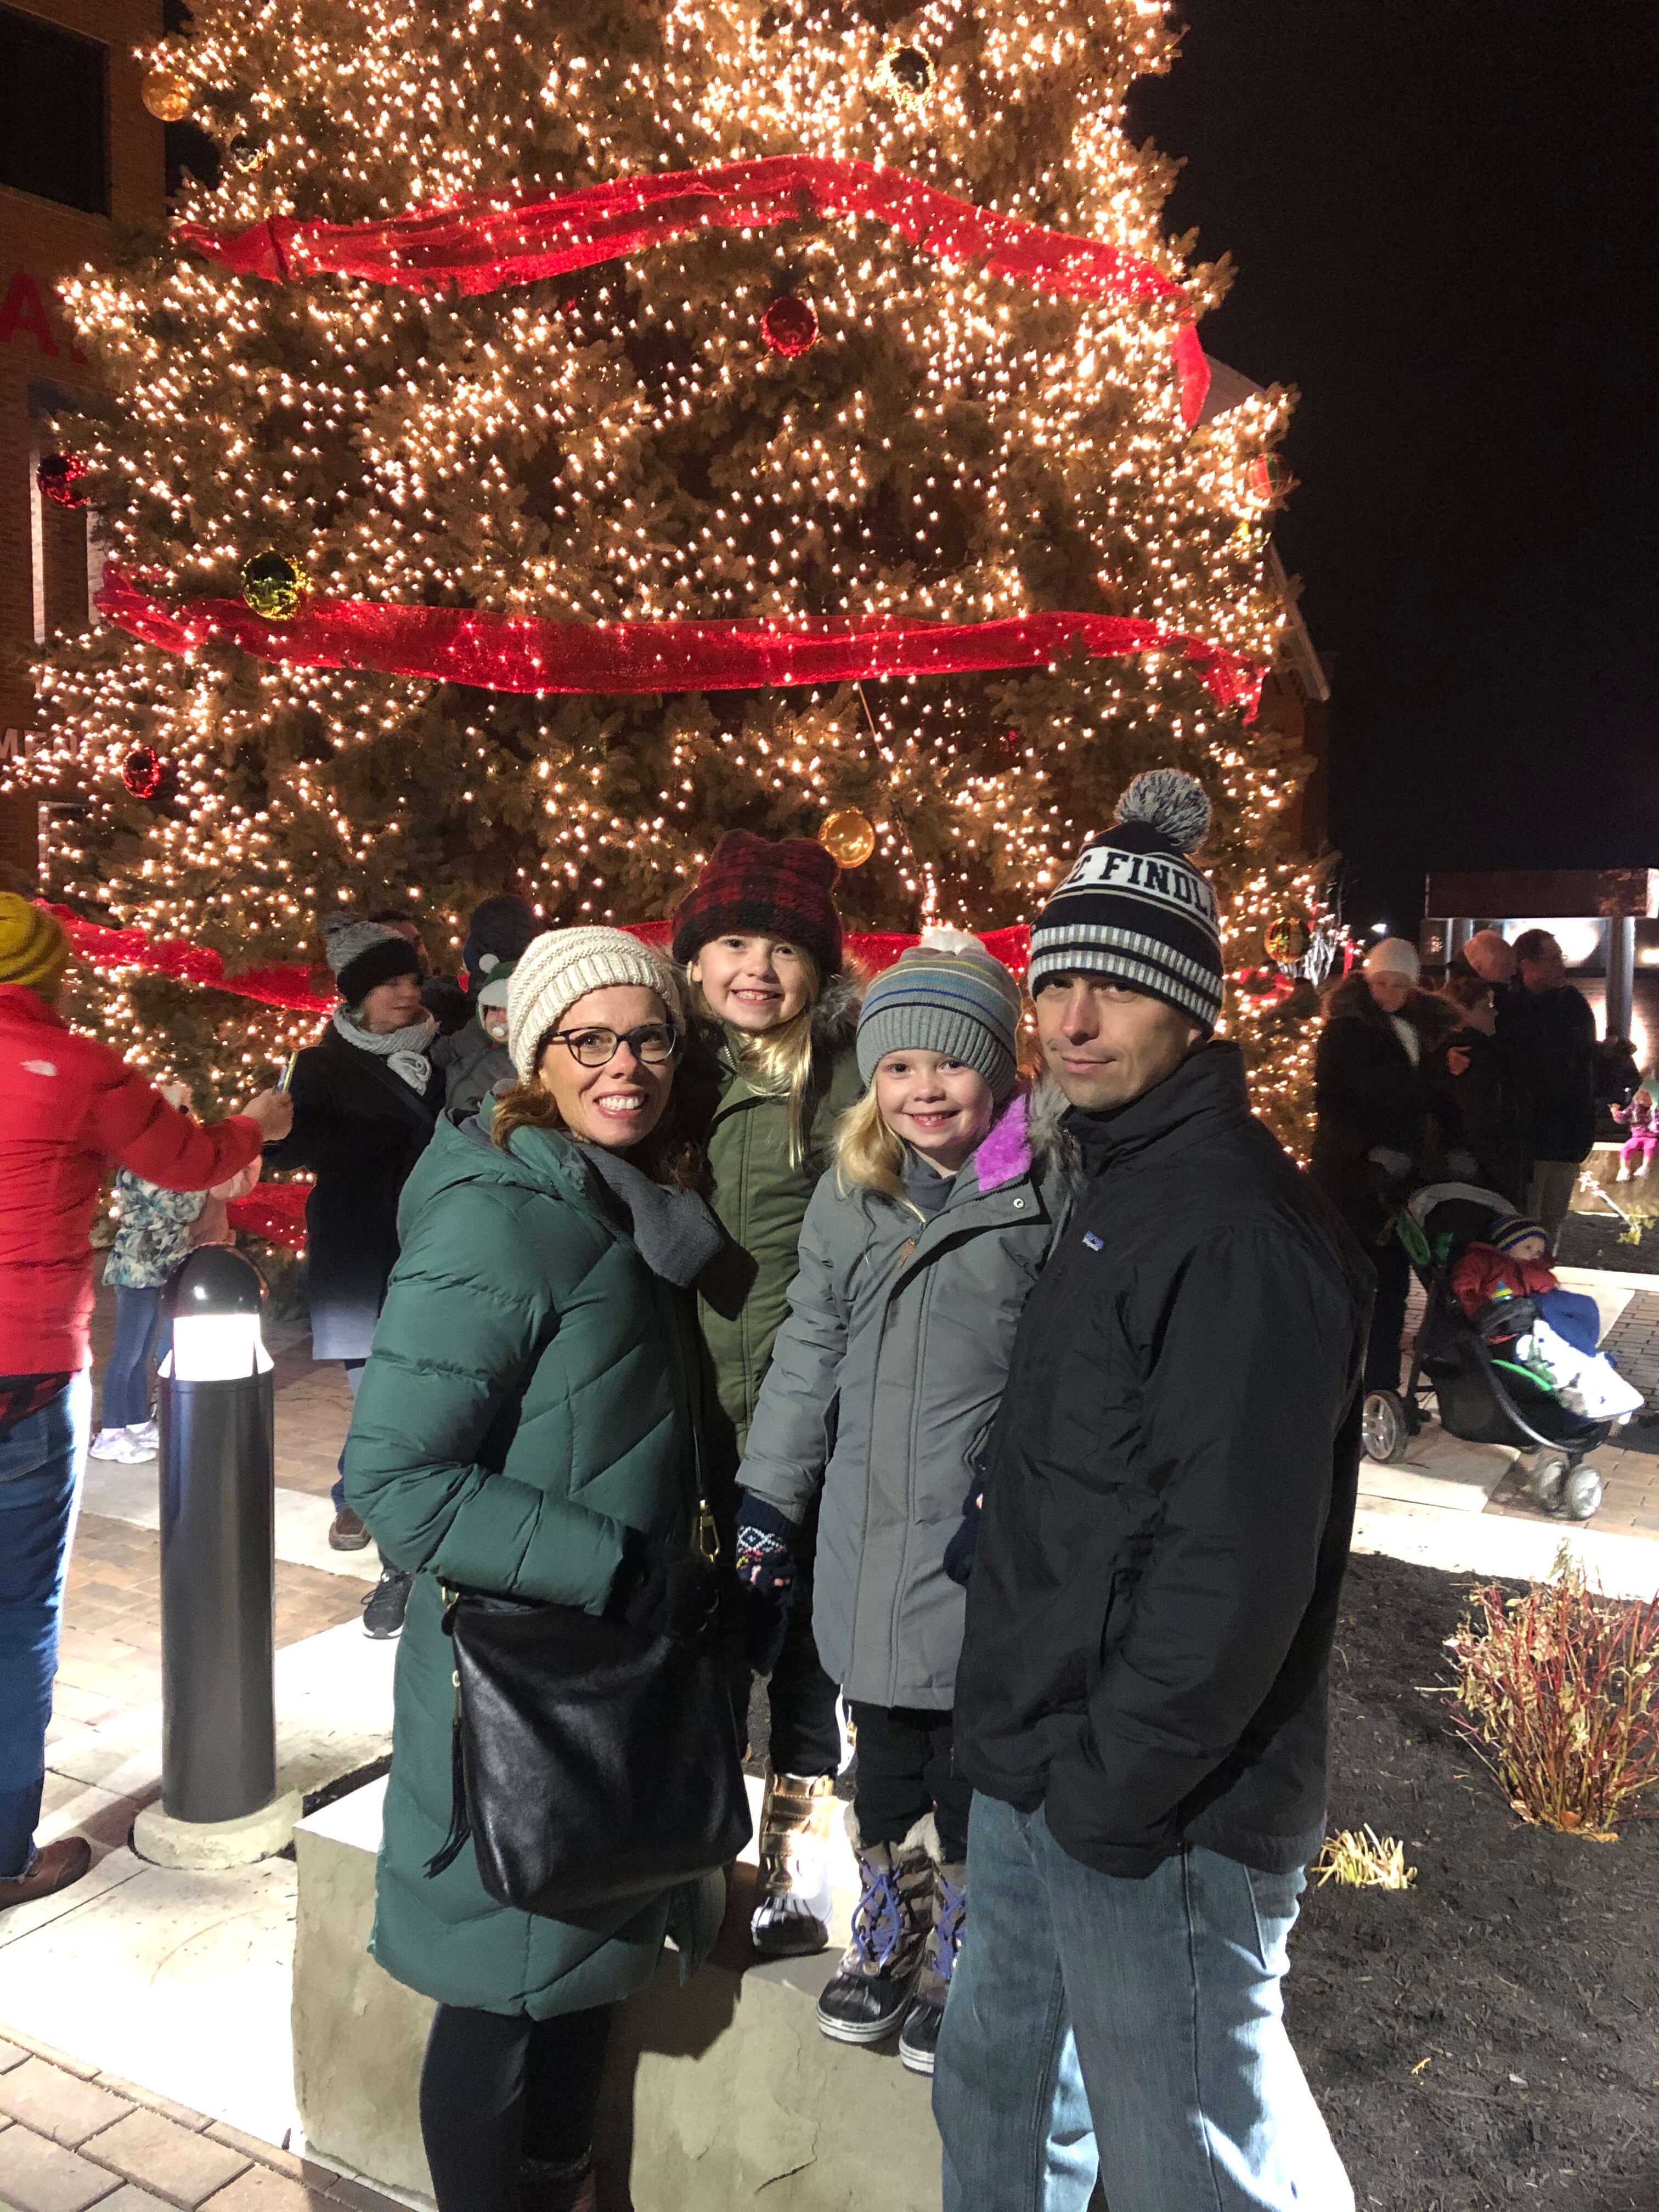 Visit Findlay director Alissa Preston shares her top ten favorite things about Findlay at Christmas, like WinterFest, luminaries, champagne, and tacos! • VisitFindlay.com